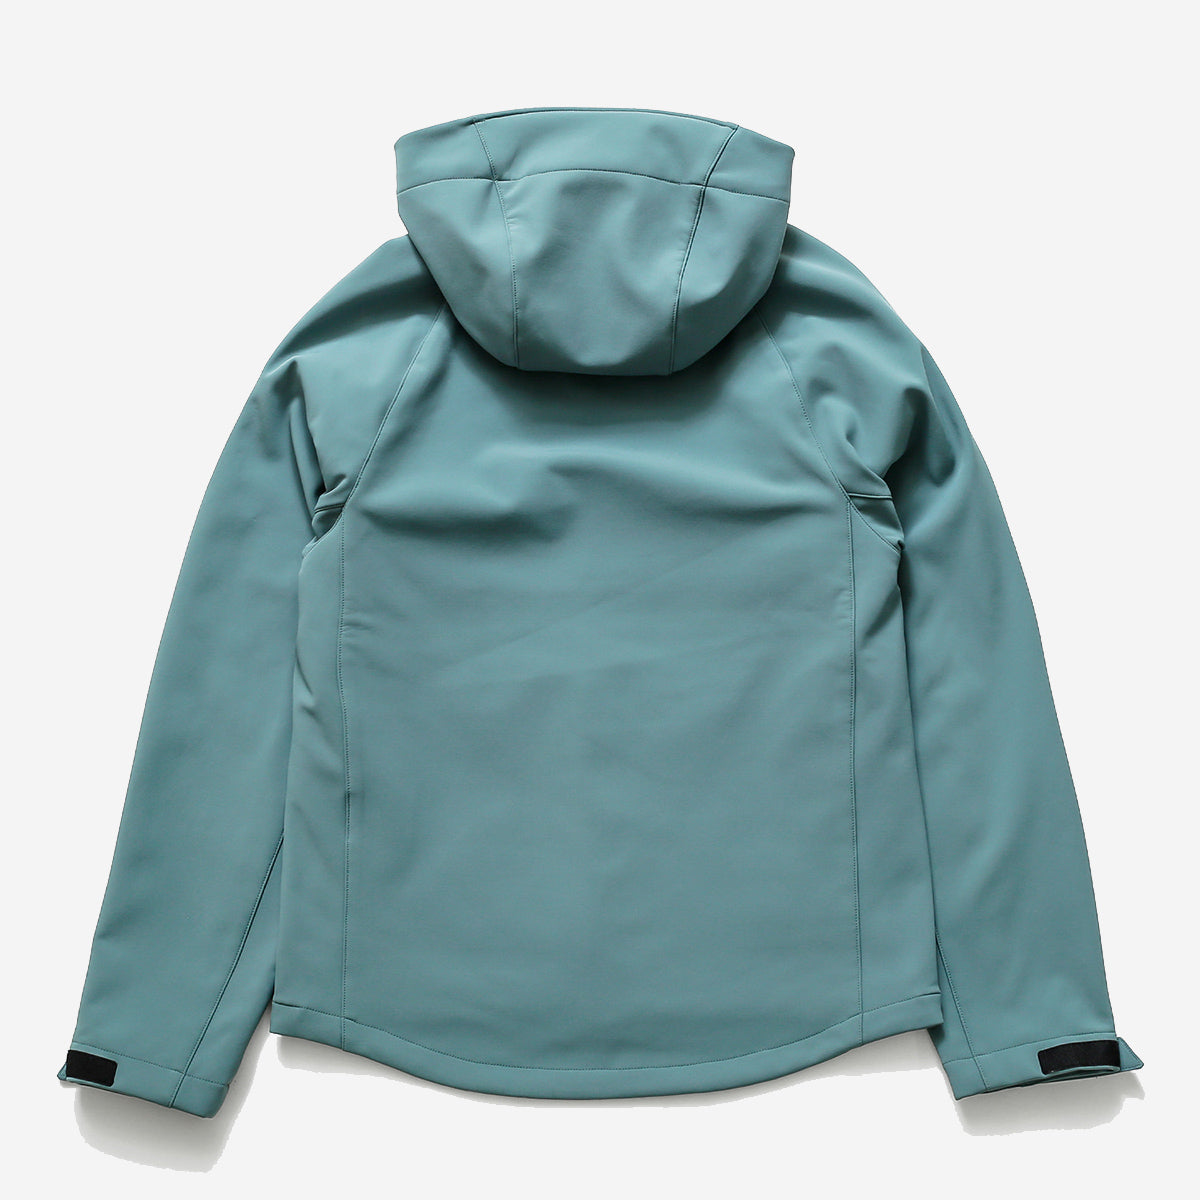 Warm Double Layer Jacket - Teal Blue